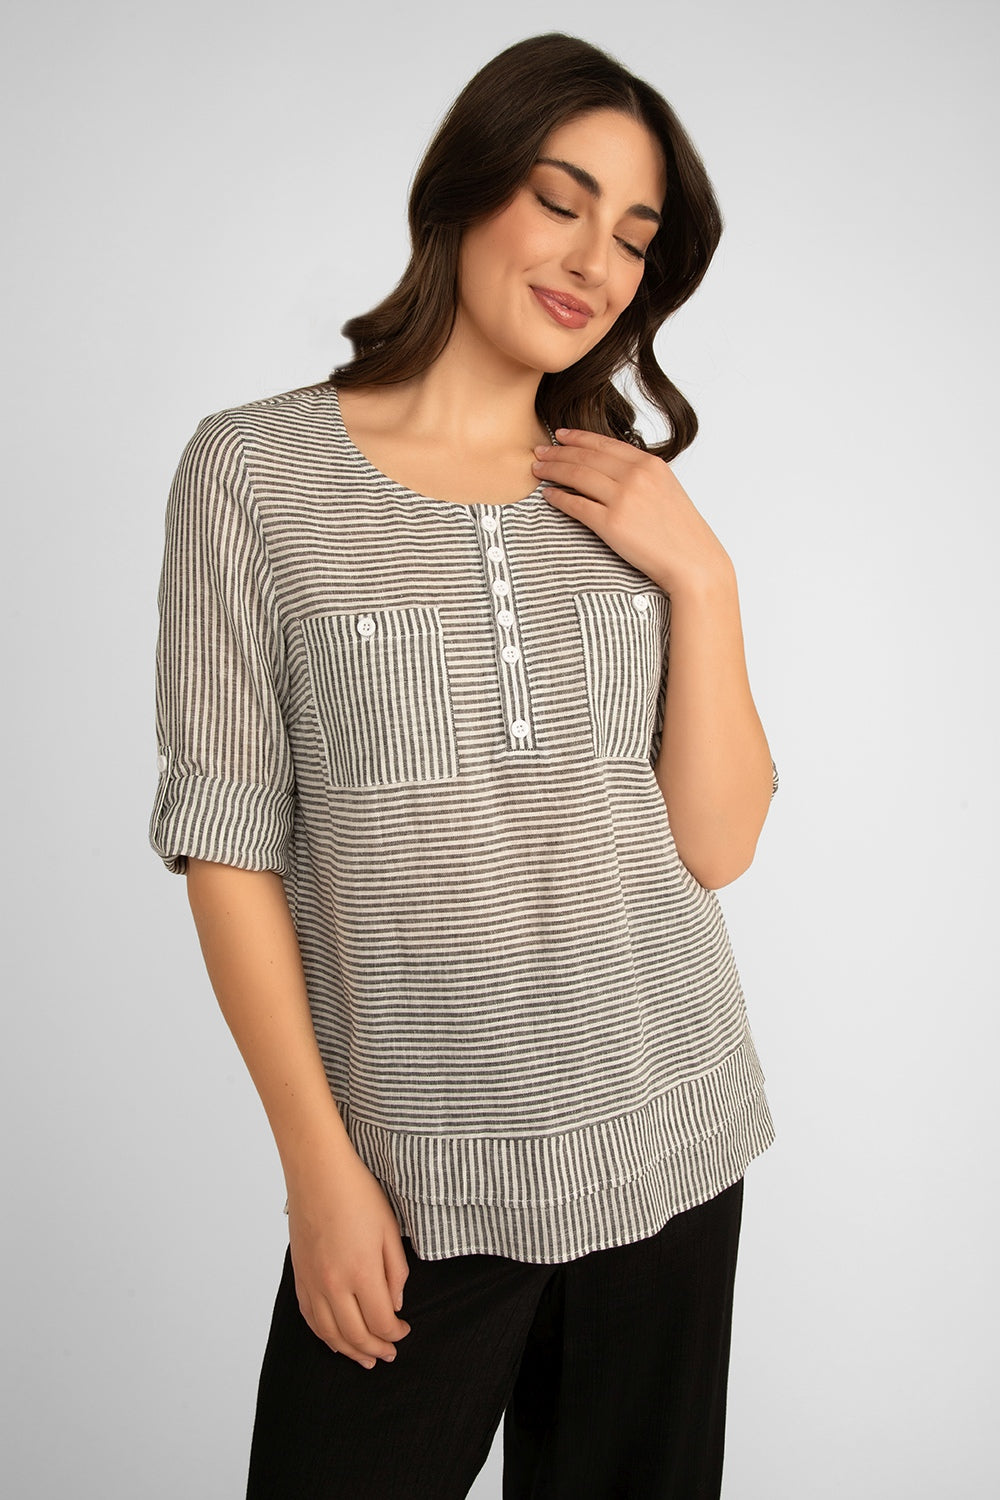 Picadilly (JM182KW) Women's 3/4 Sleeve Striped Cotton Linen Top with Half button open and two chest pockets in Grey and white fine stripes